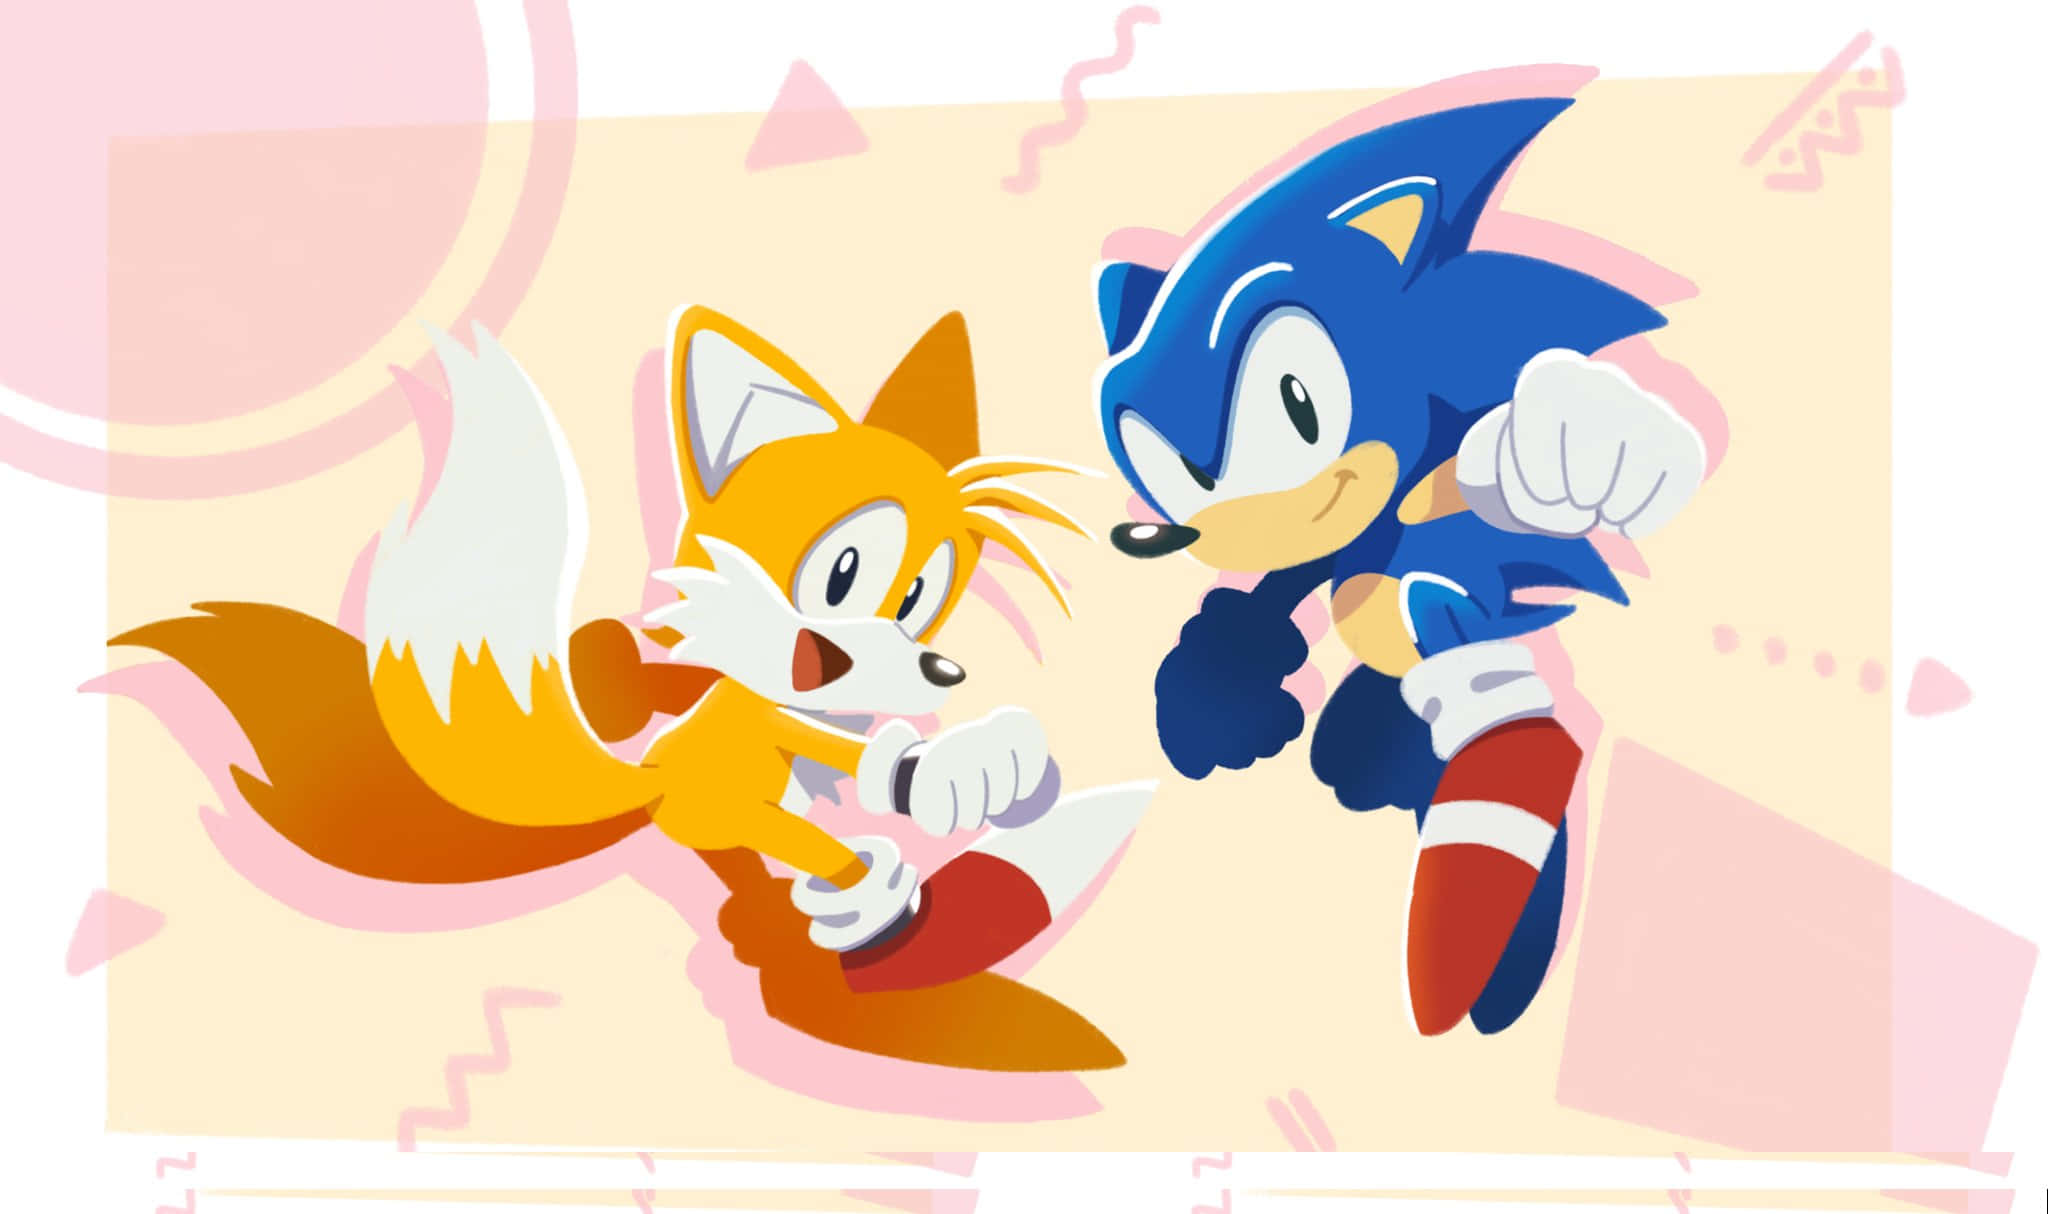 Sonic the Hedgehog Tails wallpaper  1920x1080  124347  WallpaperUP